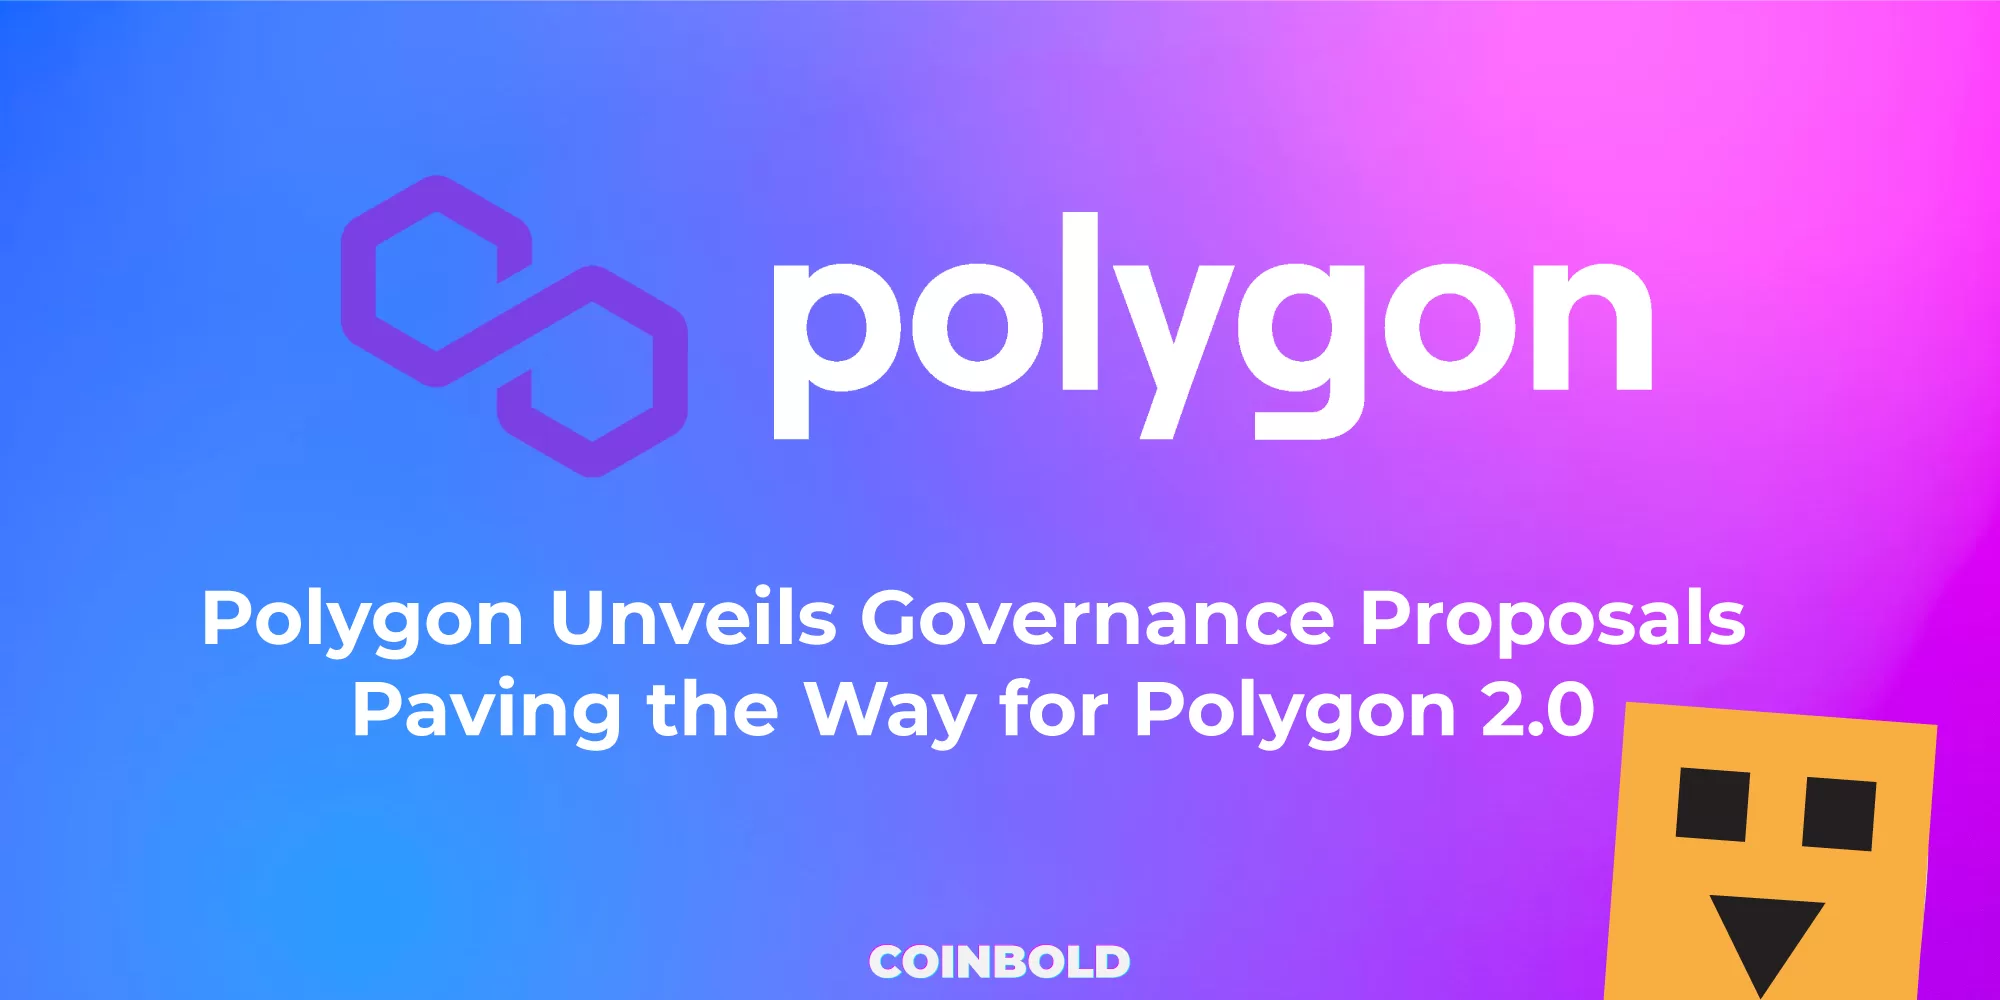 Polygon Unveils Governance Proposals Paving the Way for Polygon 2.0